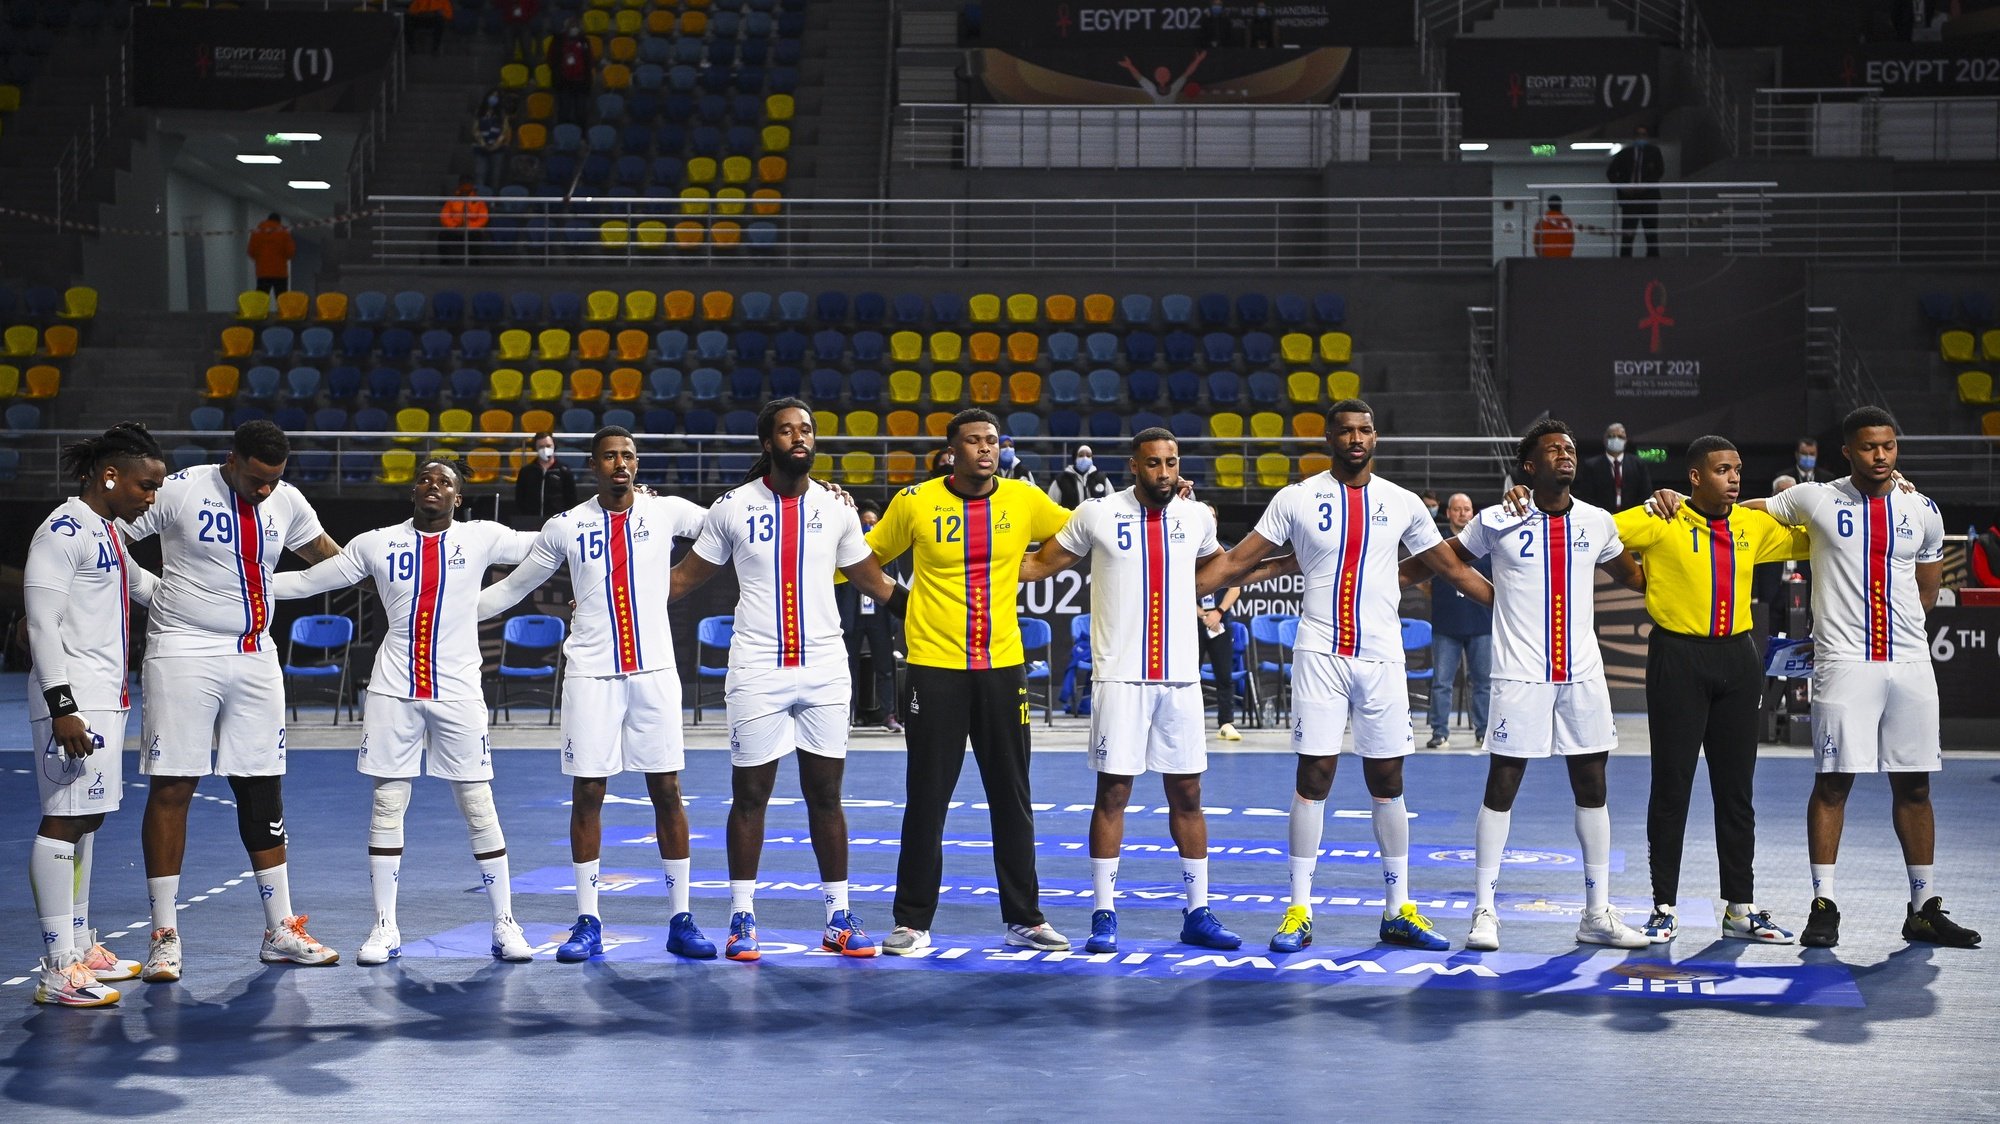 epa08940146 Players of the Cape Verde team line up prior to the match between Hungary and Cape Verde at the 27th Men&#039;s Handball World Championship in Cairo, Egypt, 15 January 2021.  EPA/Anne-Christine Poujoulat / POOL